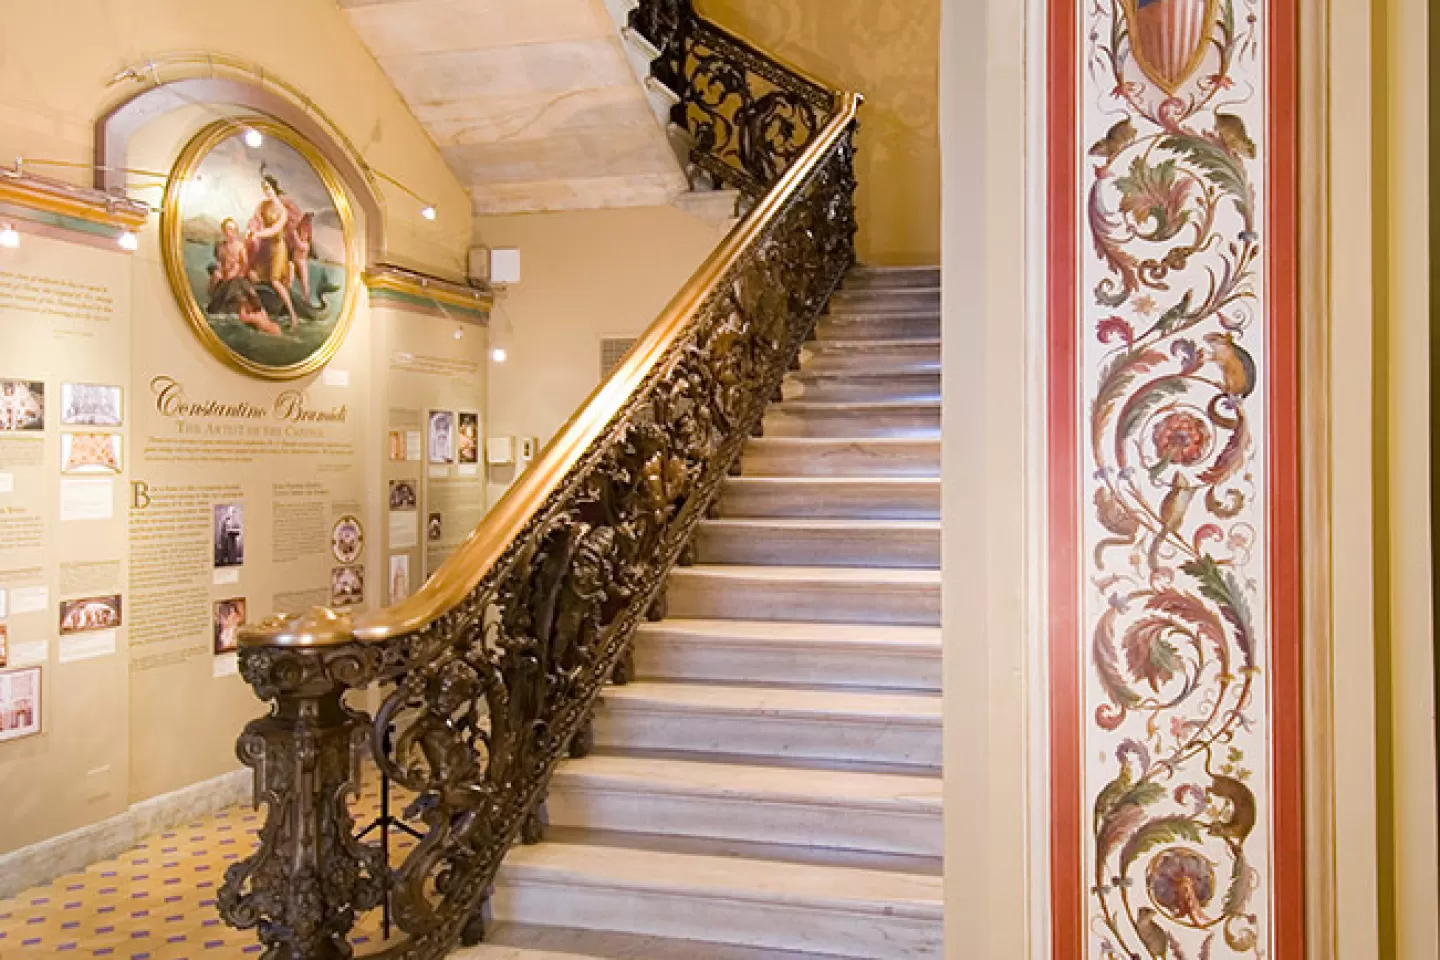 View of one of the bronze staircases in the Brumidi Corridors.